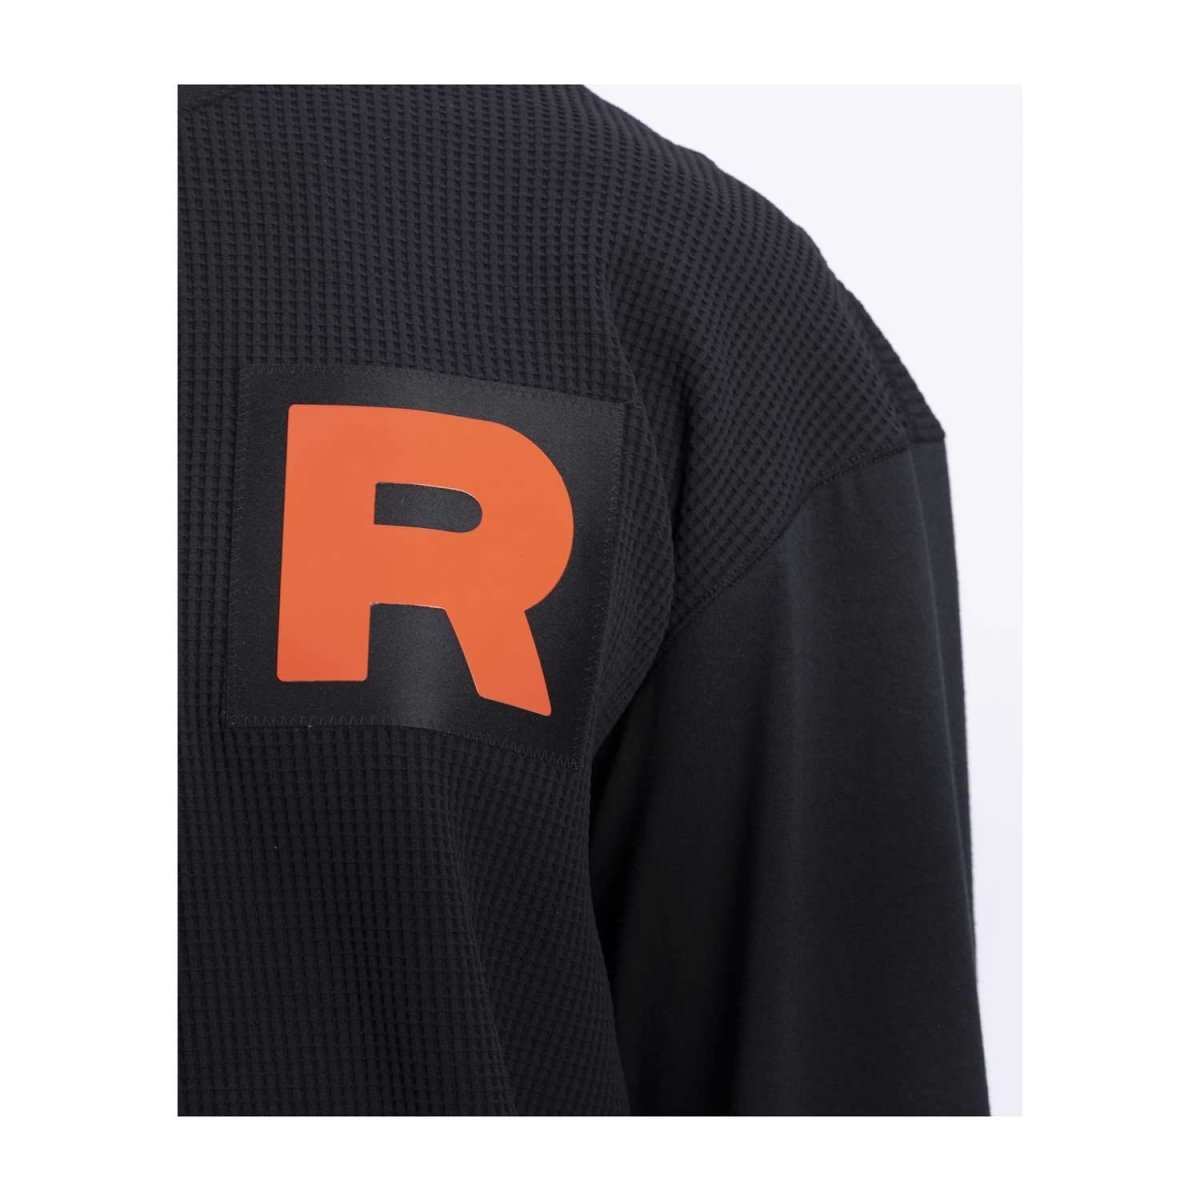 Team Rocket Apparel Is Now Available At The Pokémon Center, 40% OFF